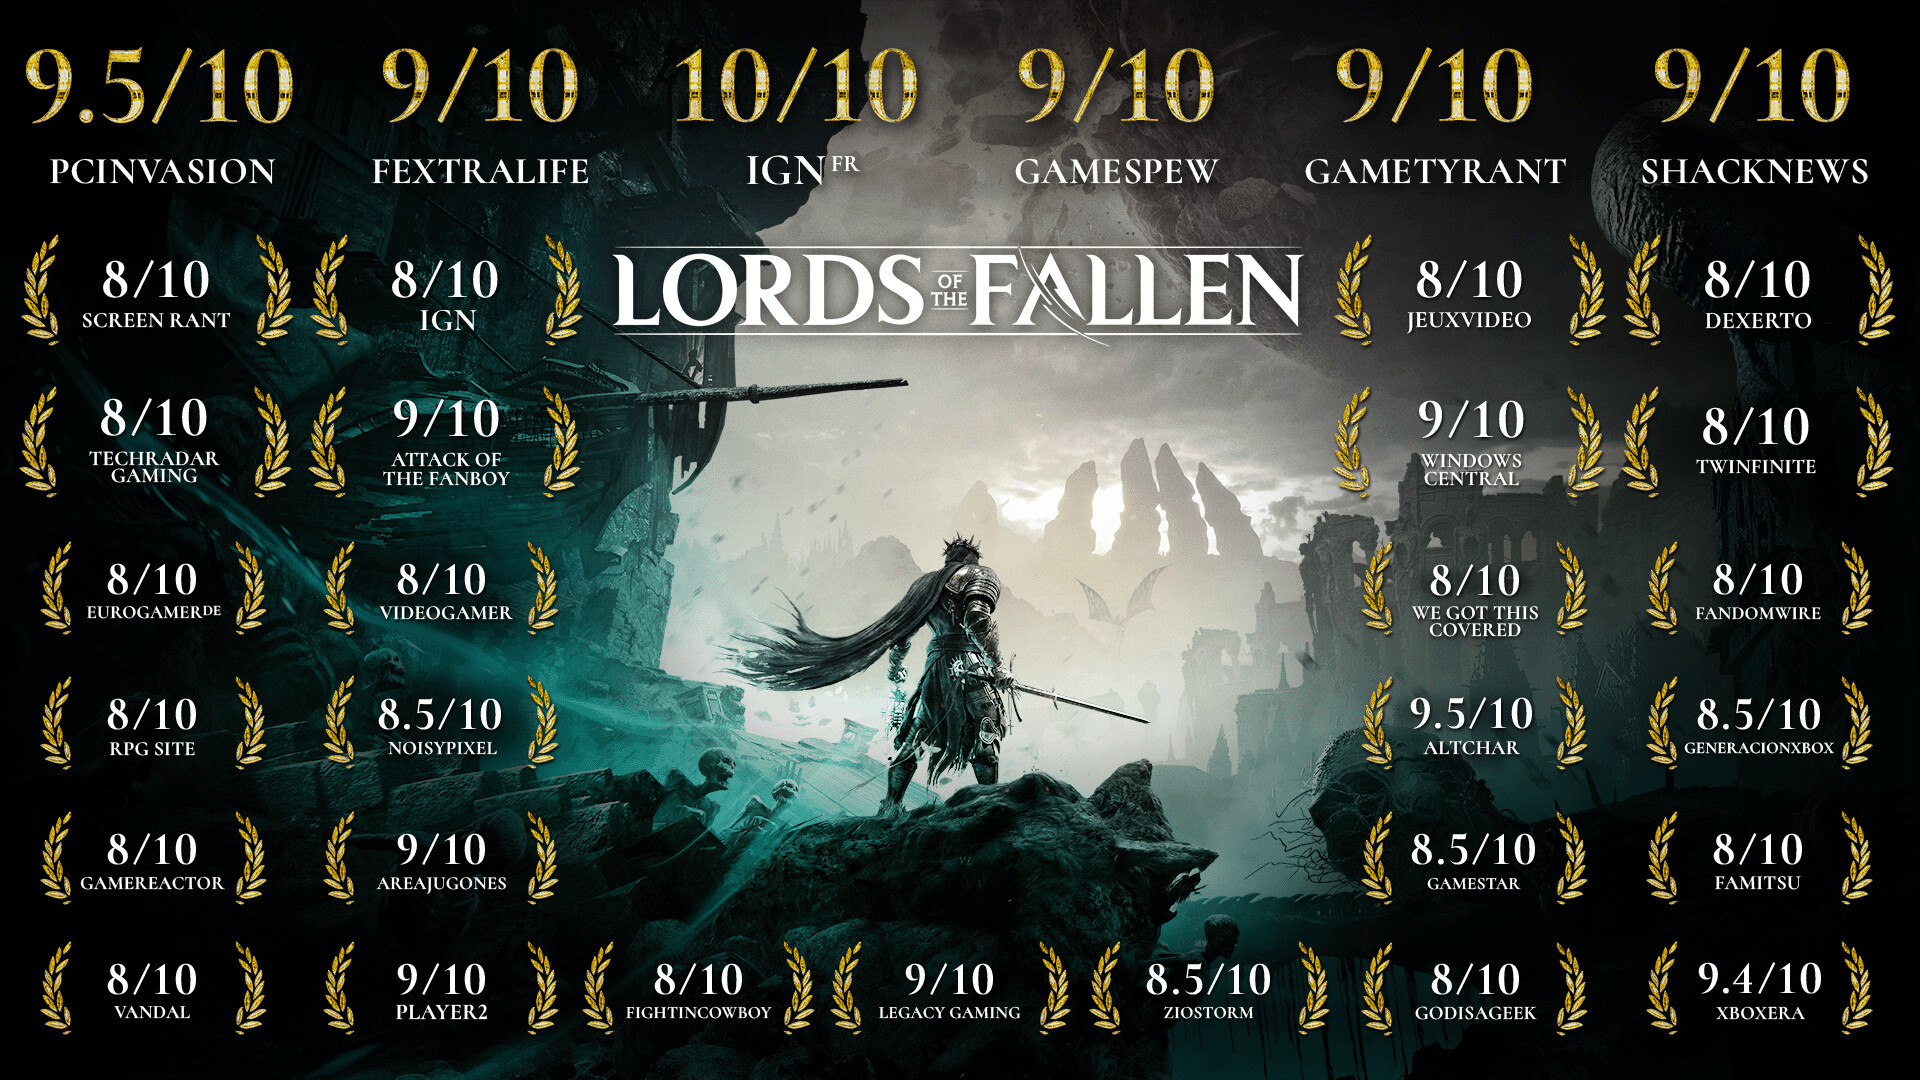 Video Game Review: Lords of the Fallen